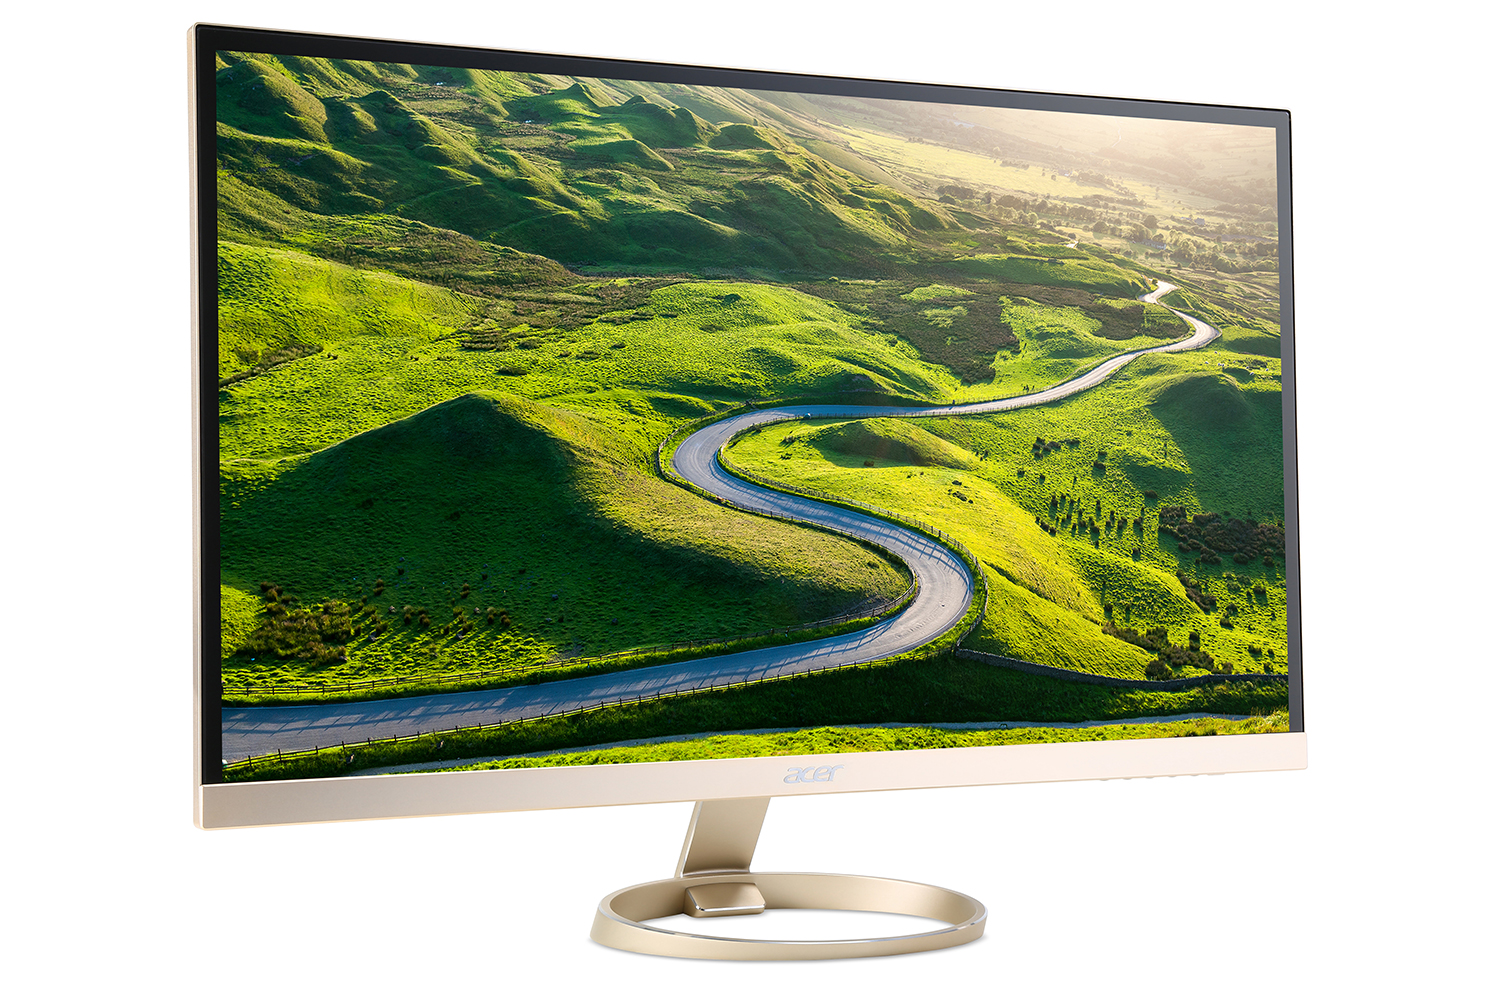 acer computing announce ces 2016 h277hu right angle